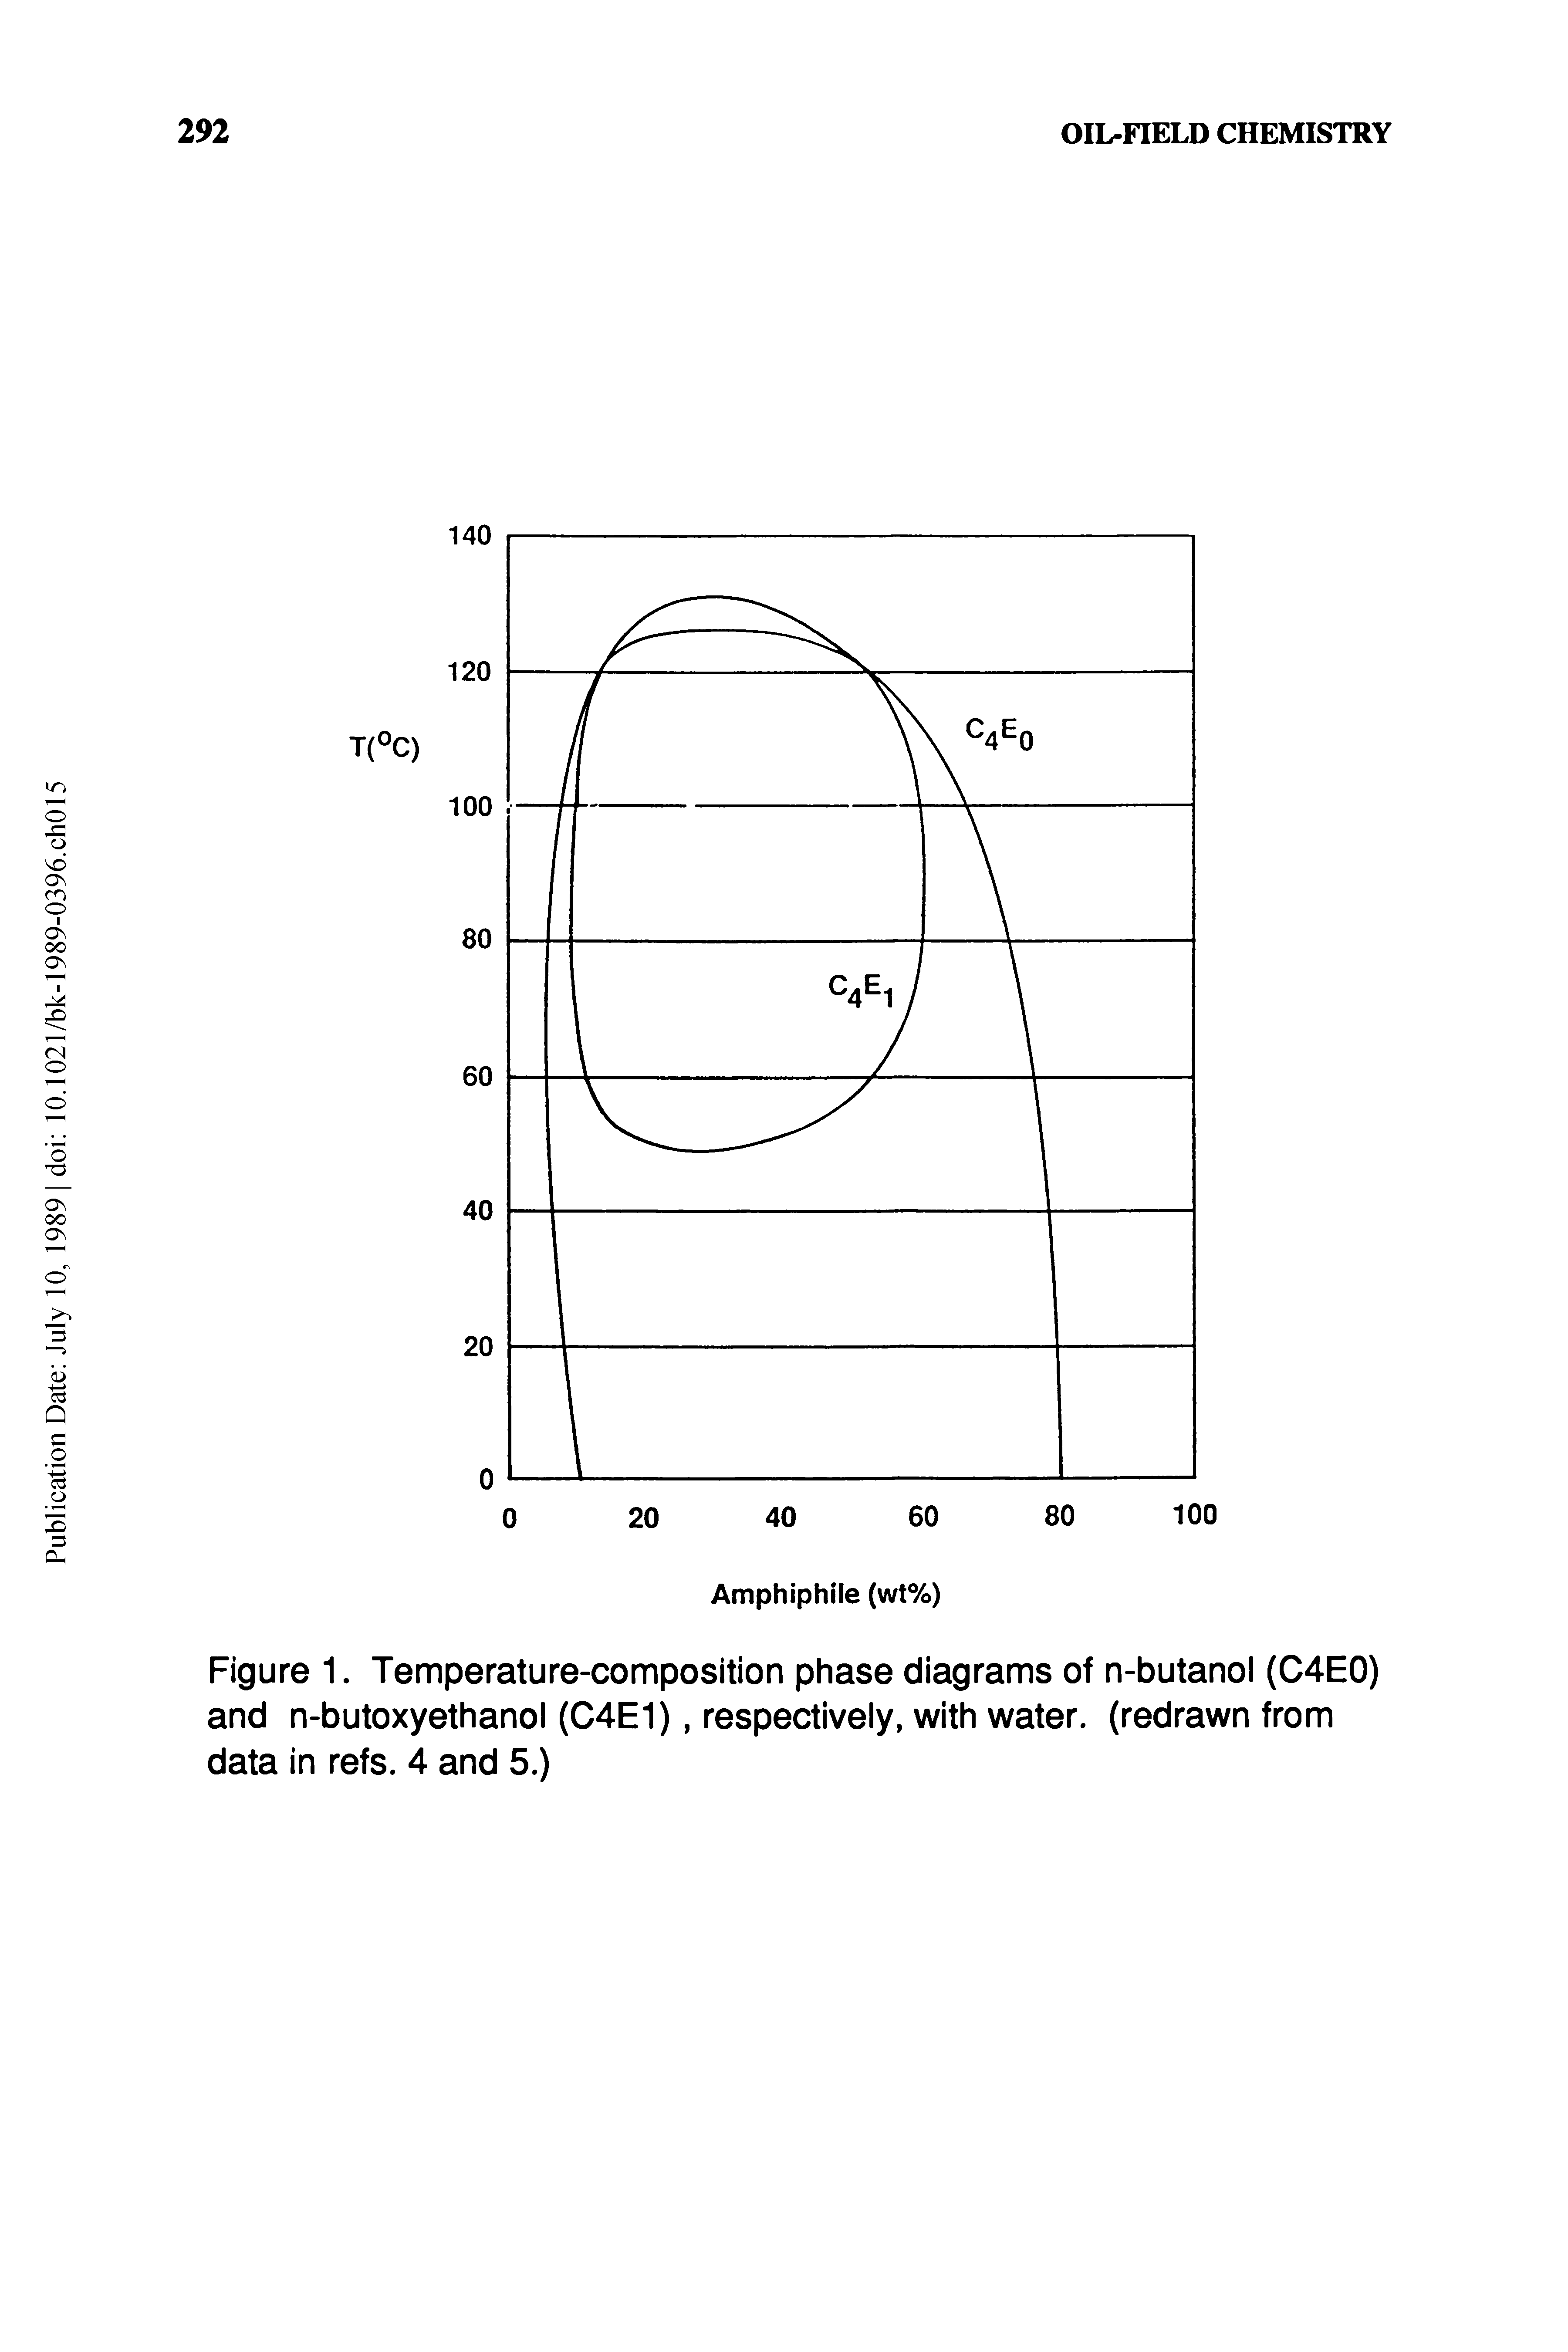 Figure 1. Temperature-composition phase diagrams of n-butanol (C4E0) and n-butoxyethanol (C4E1), respectively, with water, (redrawn from data in refs. 4 and 5.)...